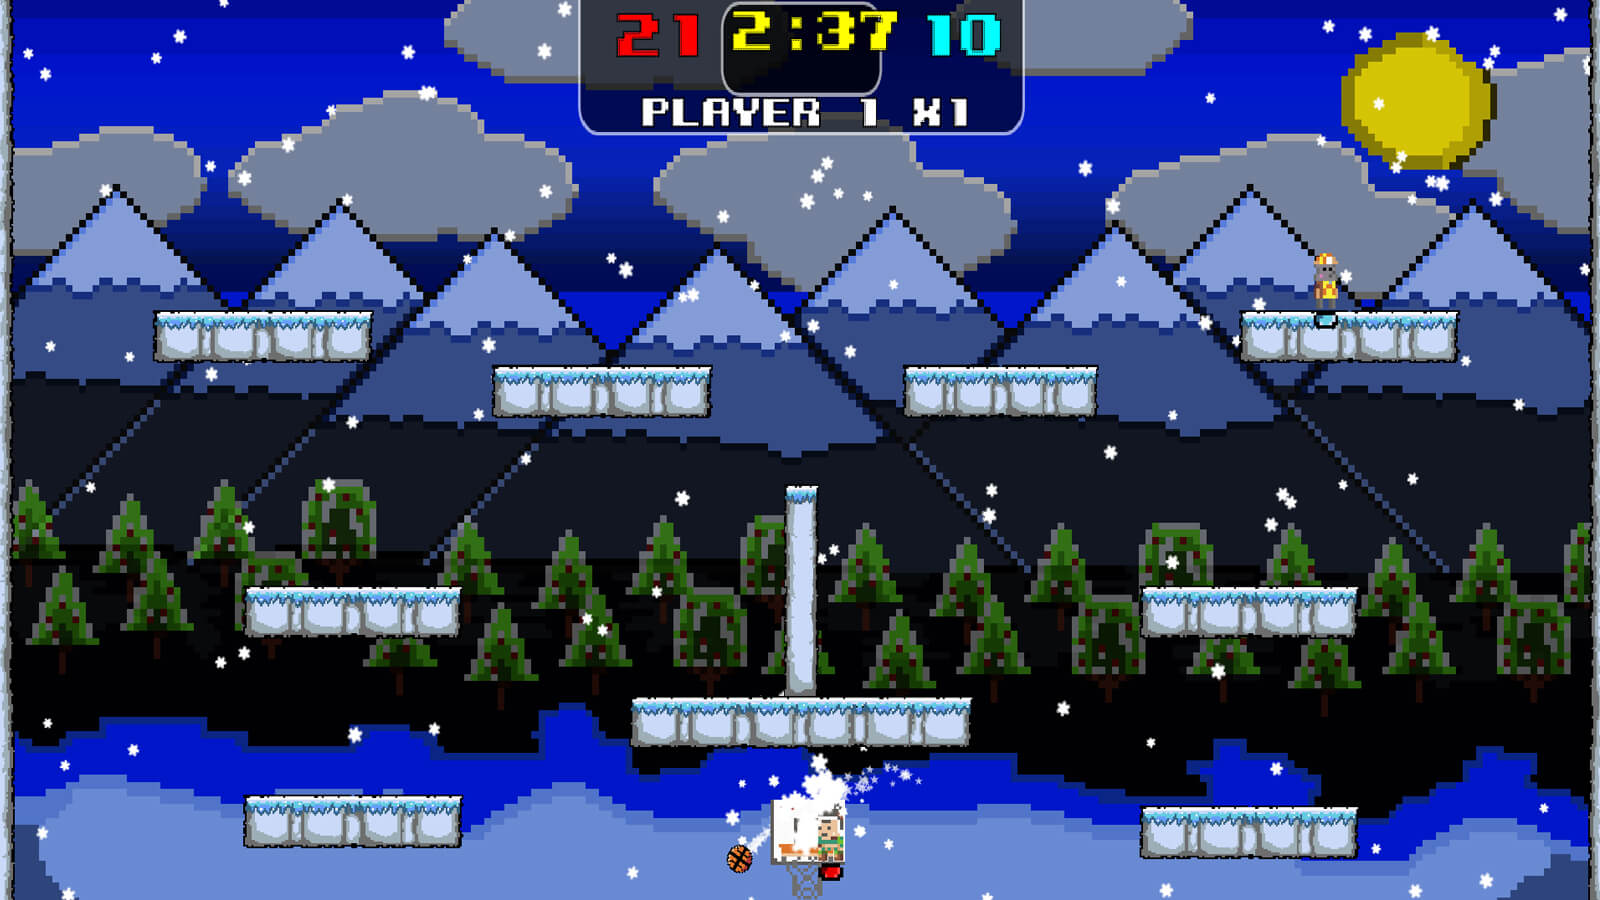 A playable character stands on an icy platform with snow-topped mountains in the background